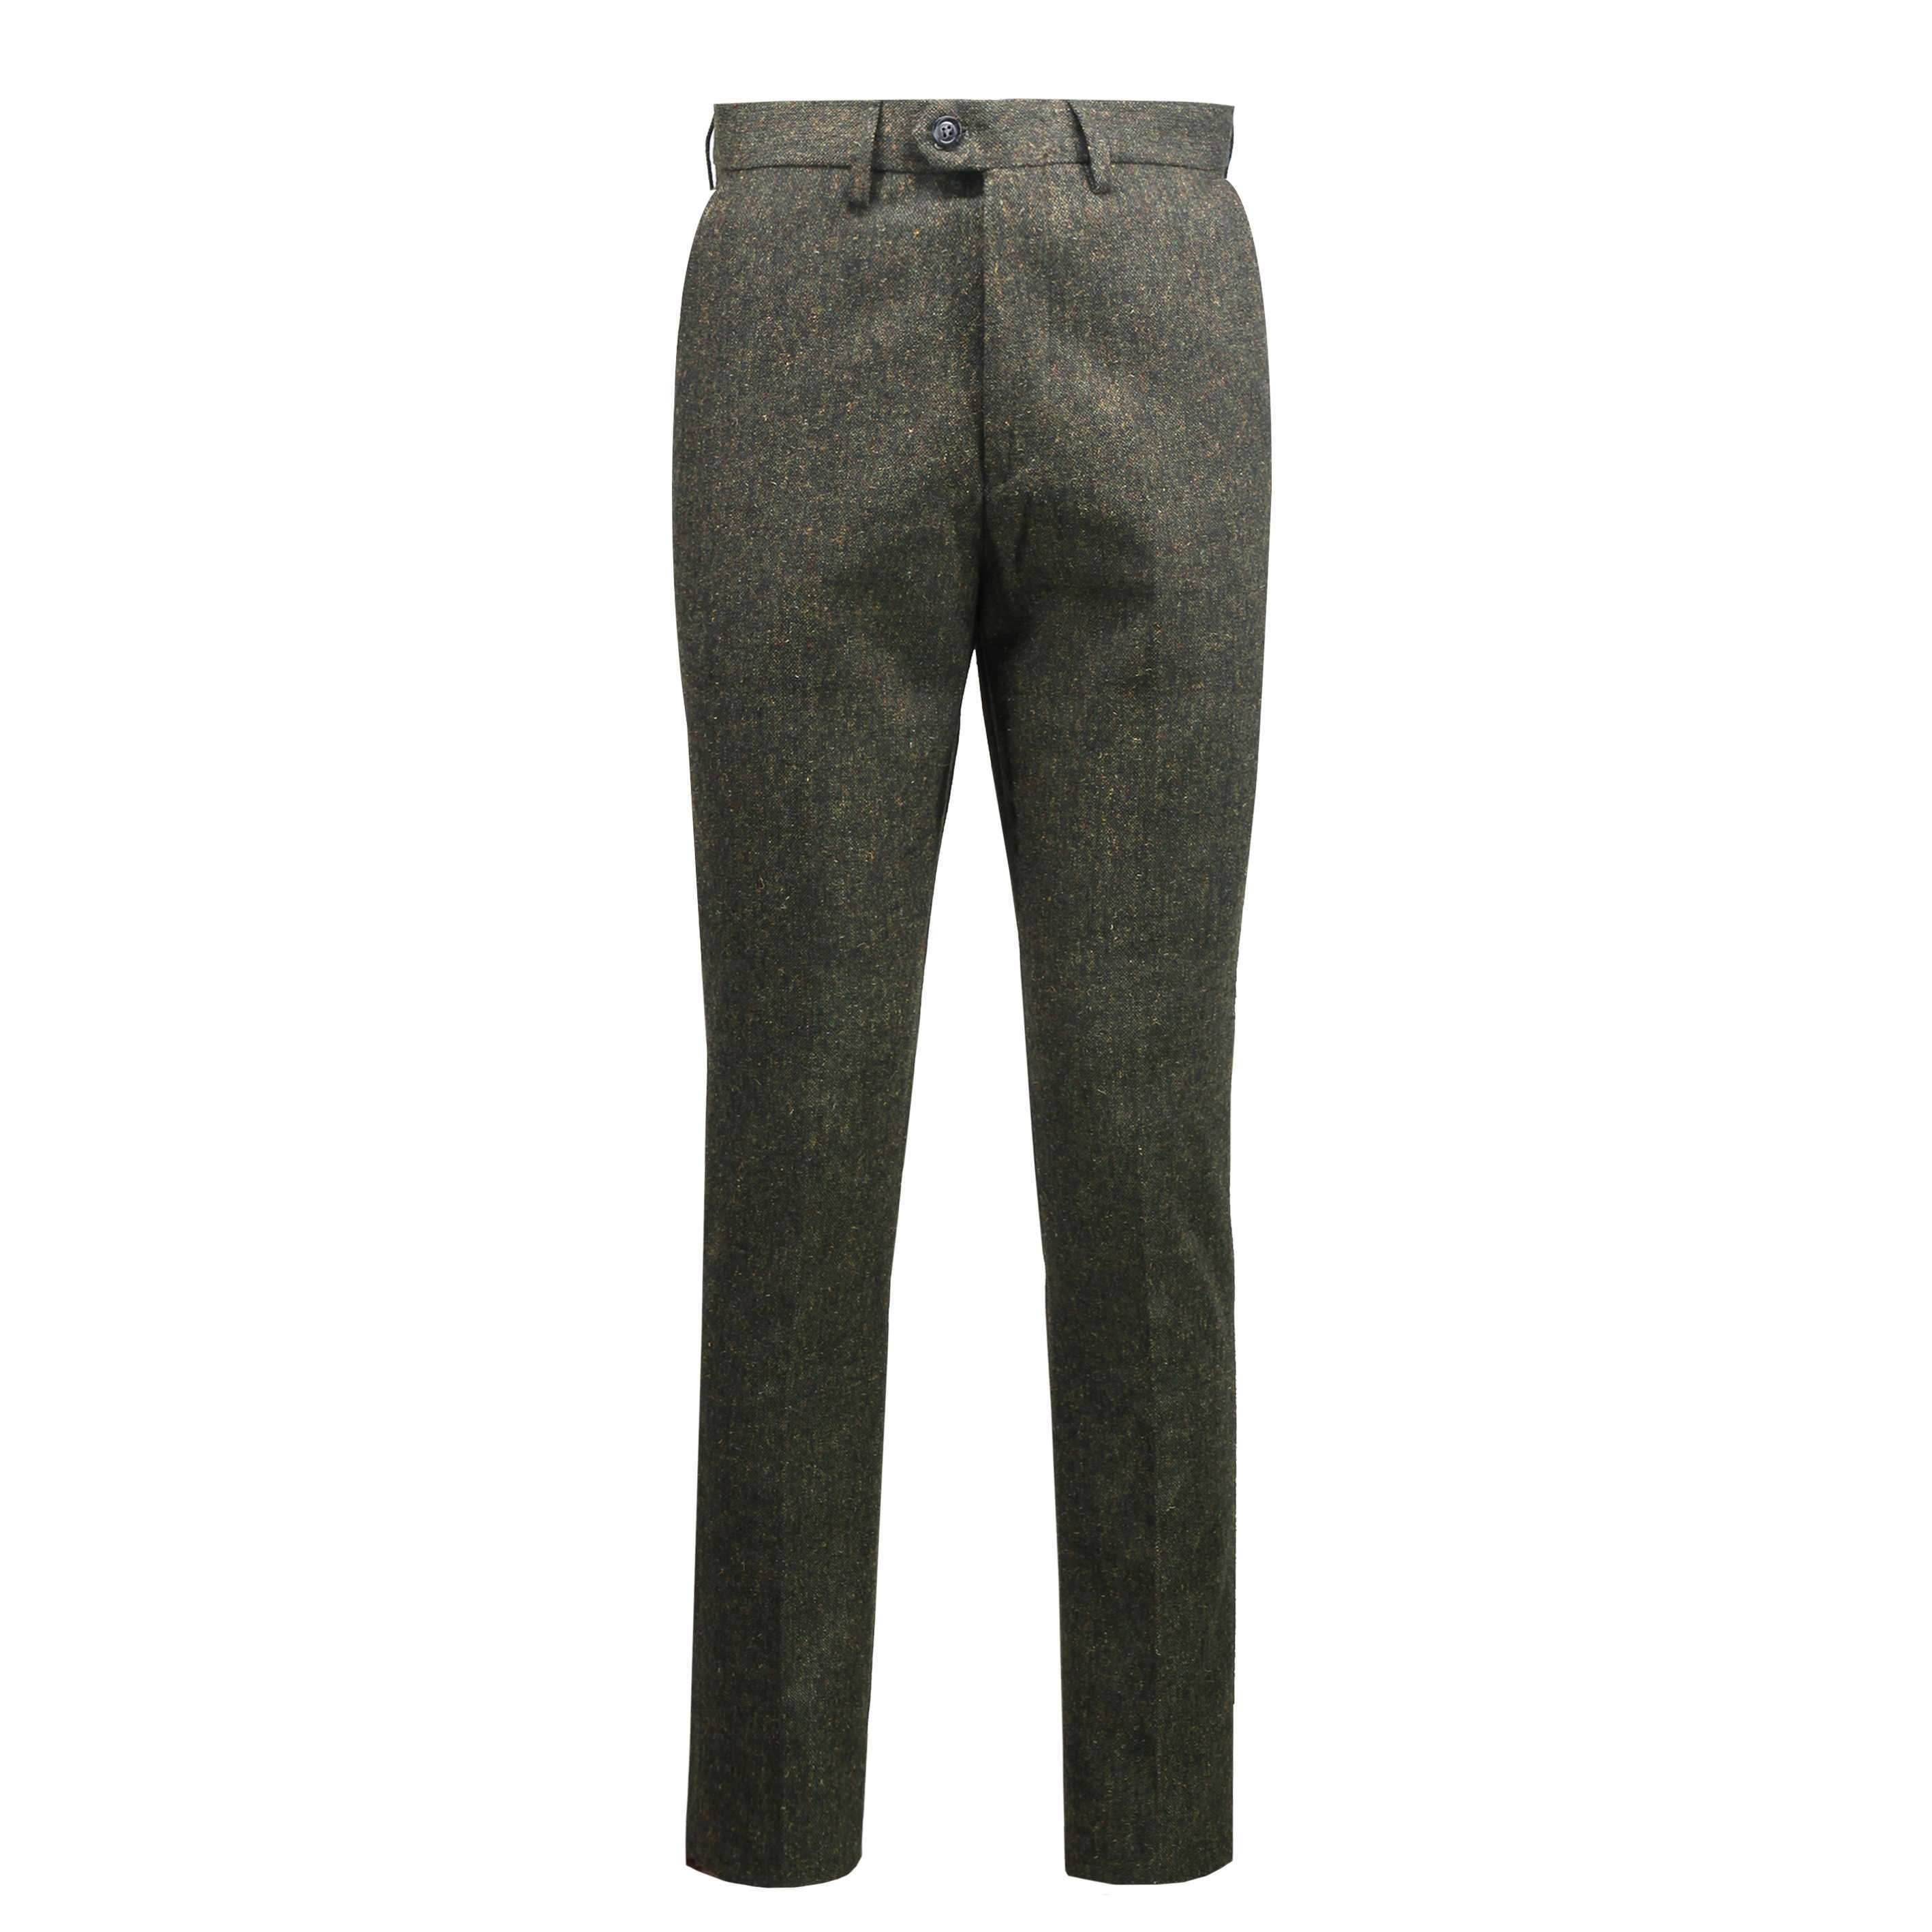 Men’s Classic Green Tweed Trousers Vintage Styled Tailored Fit Formal Suit Pants